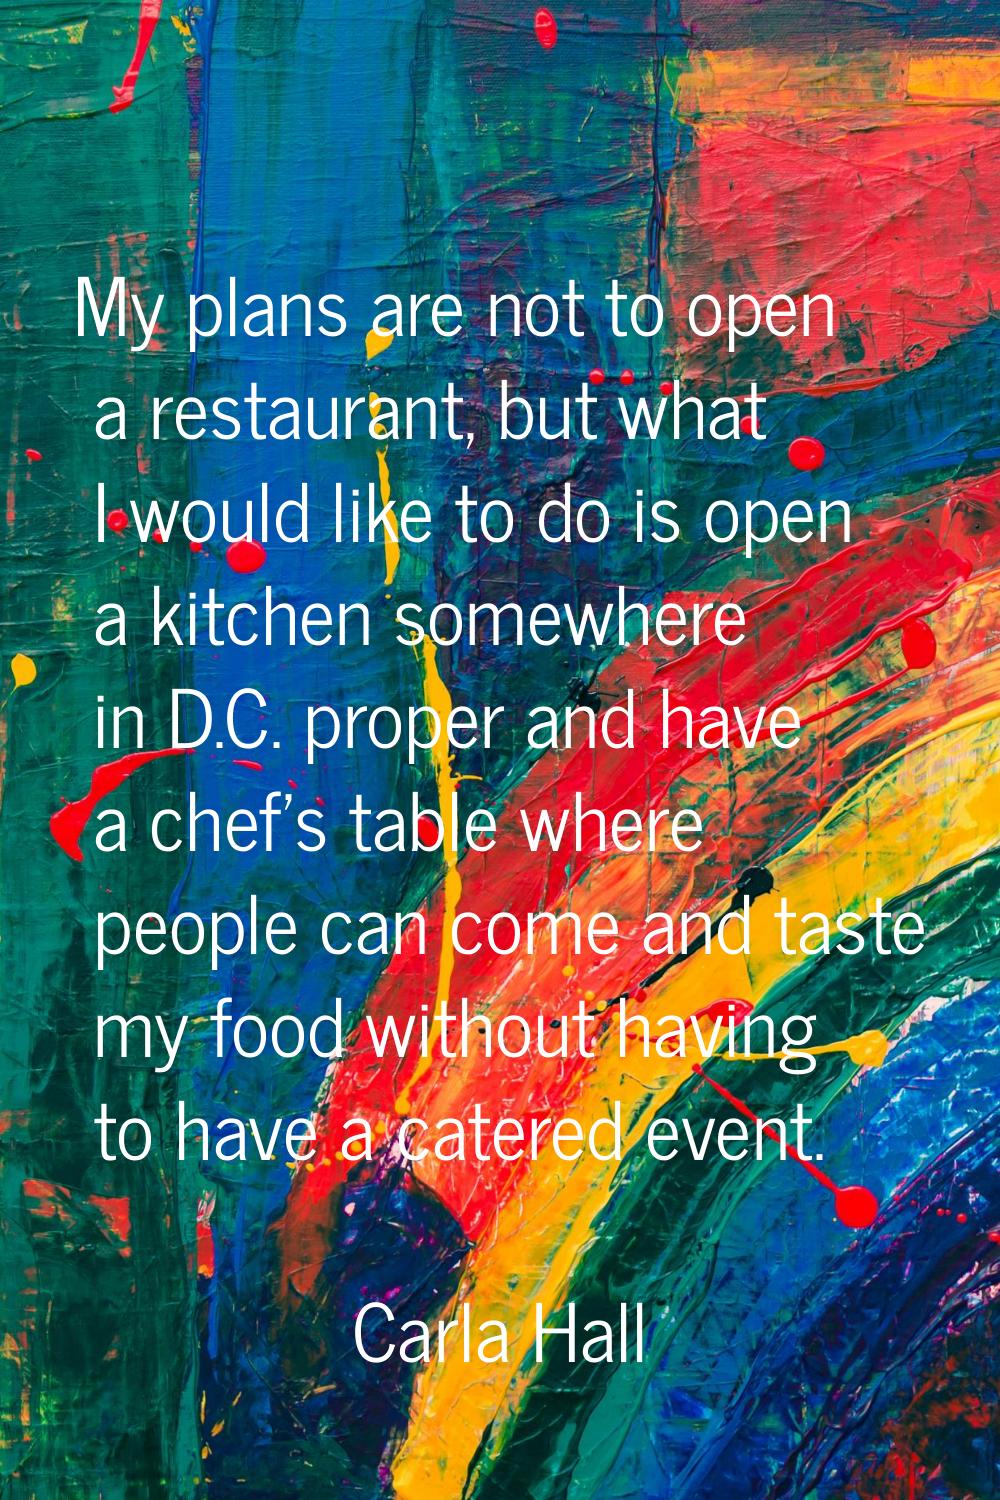 My plans are not to open a restaurant, but what I would like to do is open a kitchen somewhere in D